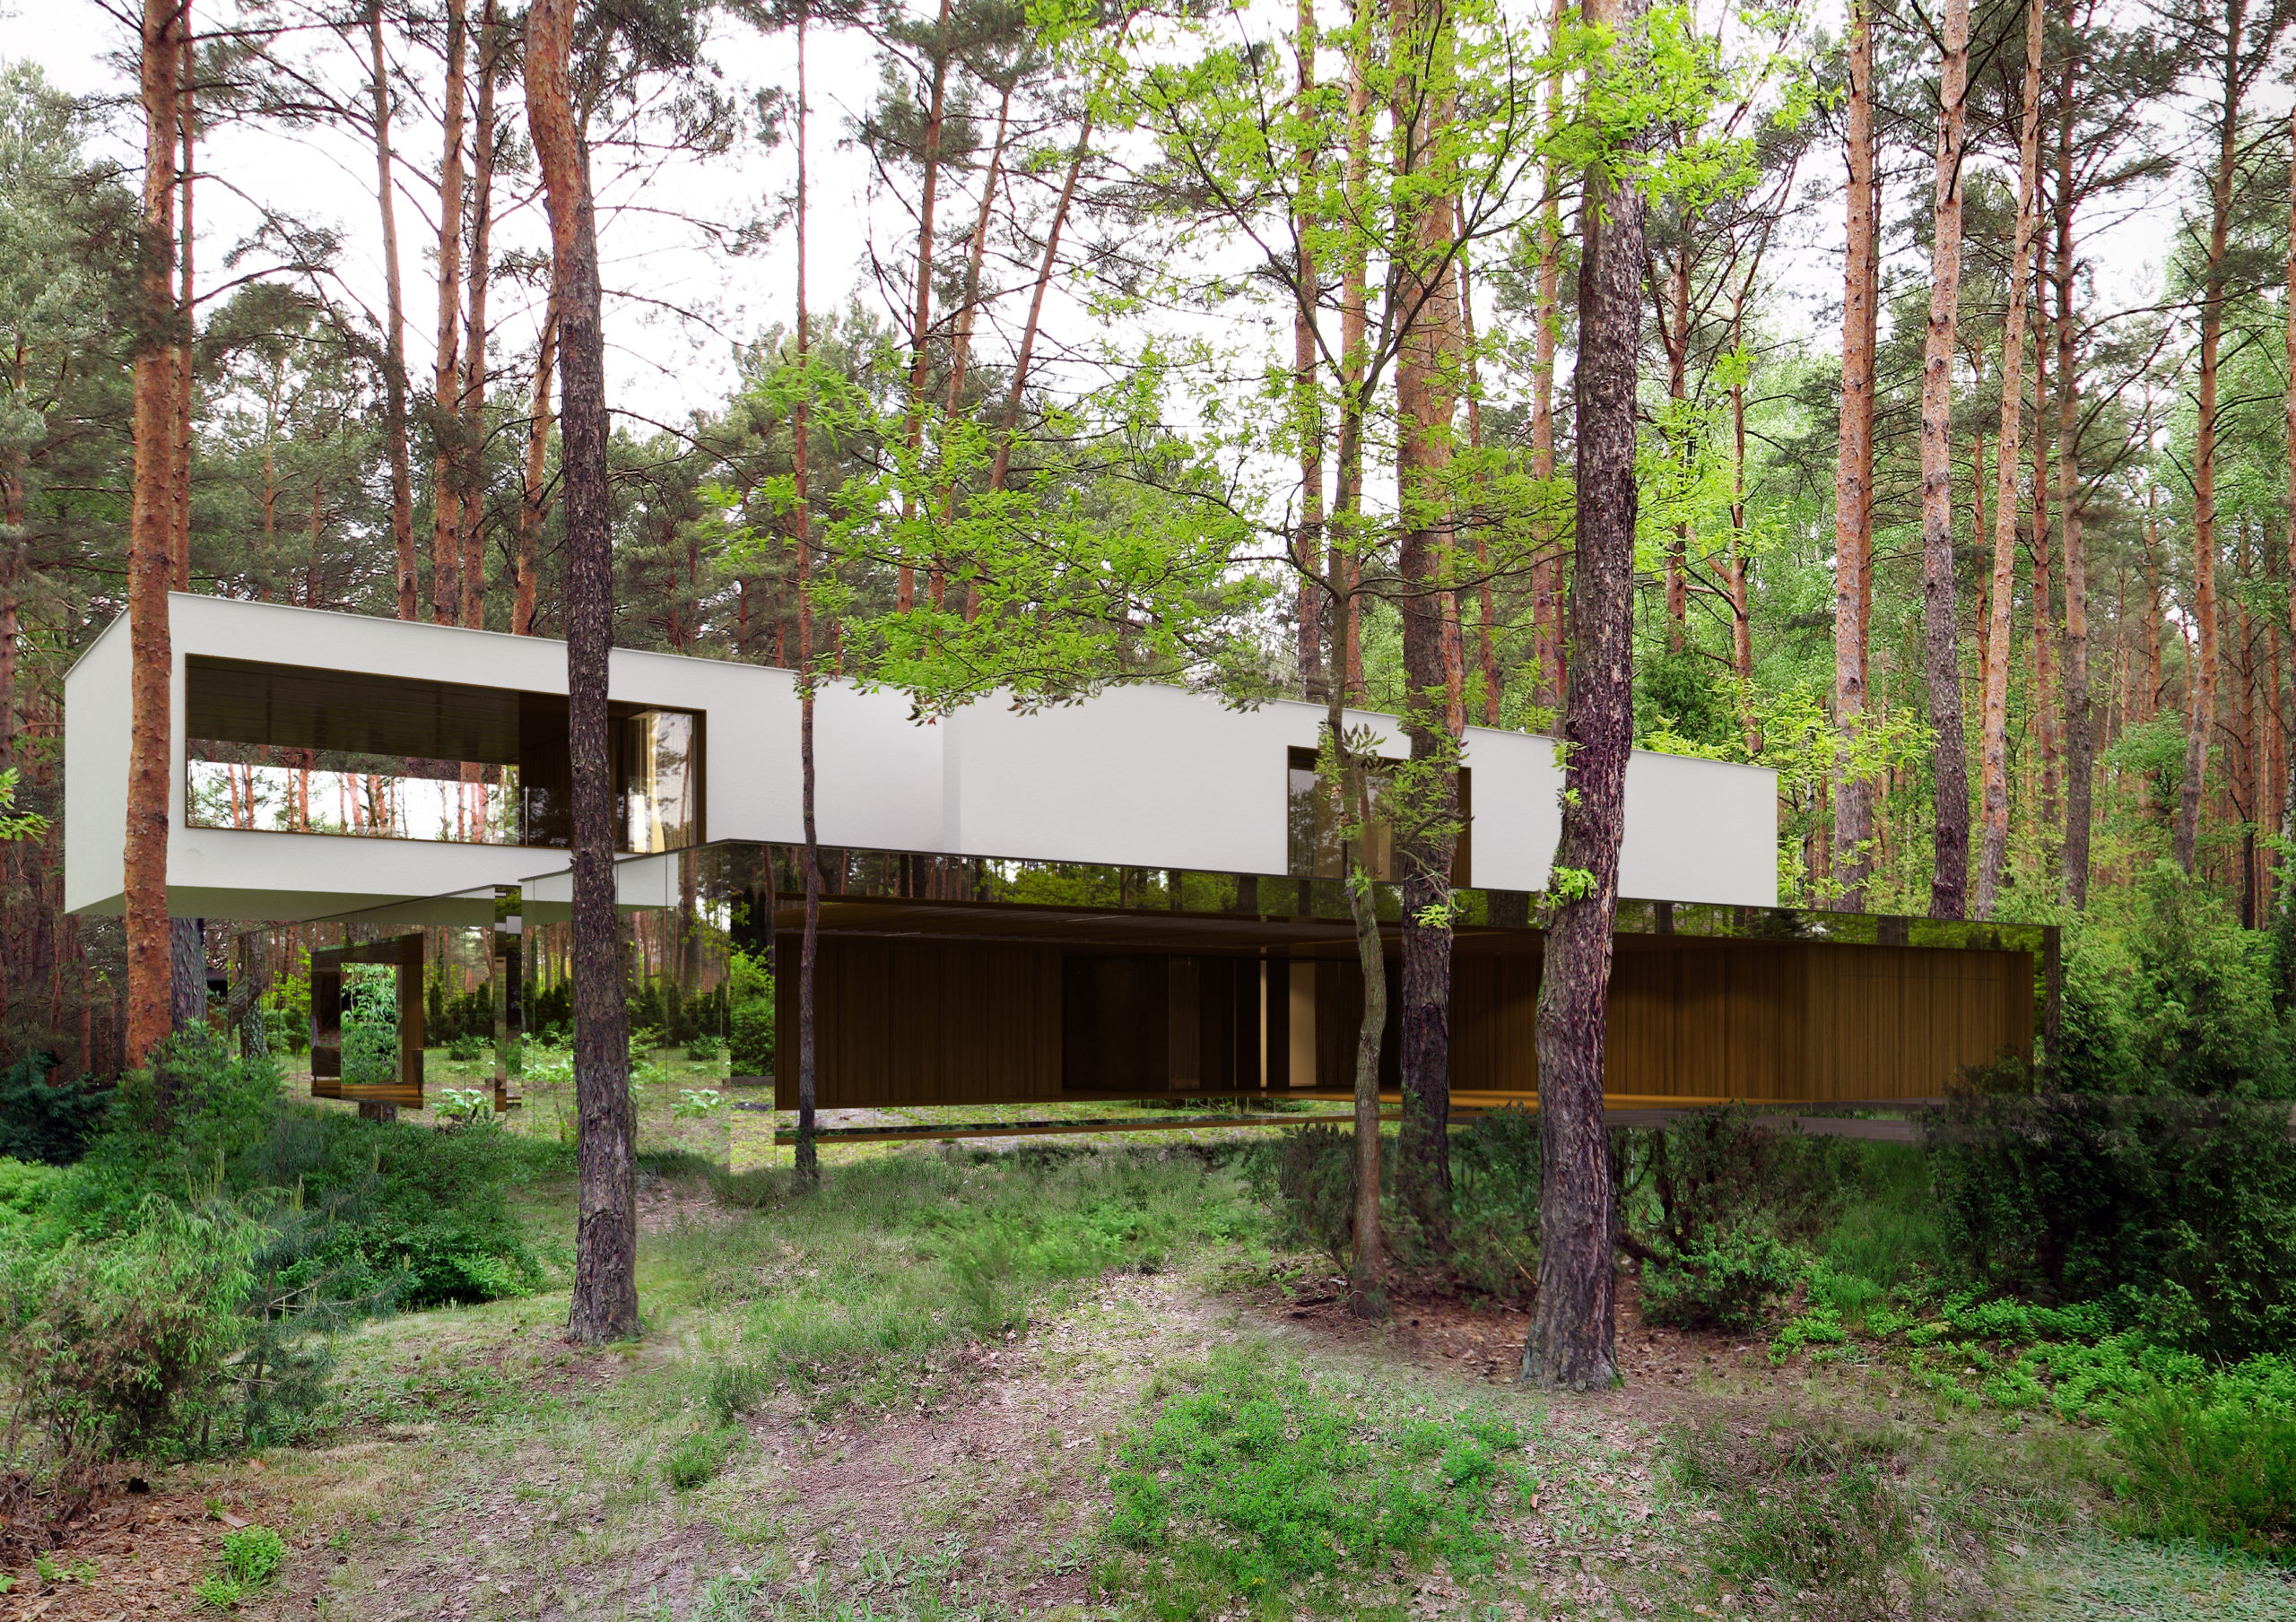 This Mirror House Vanishes Into The Forest